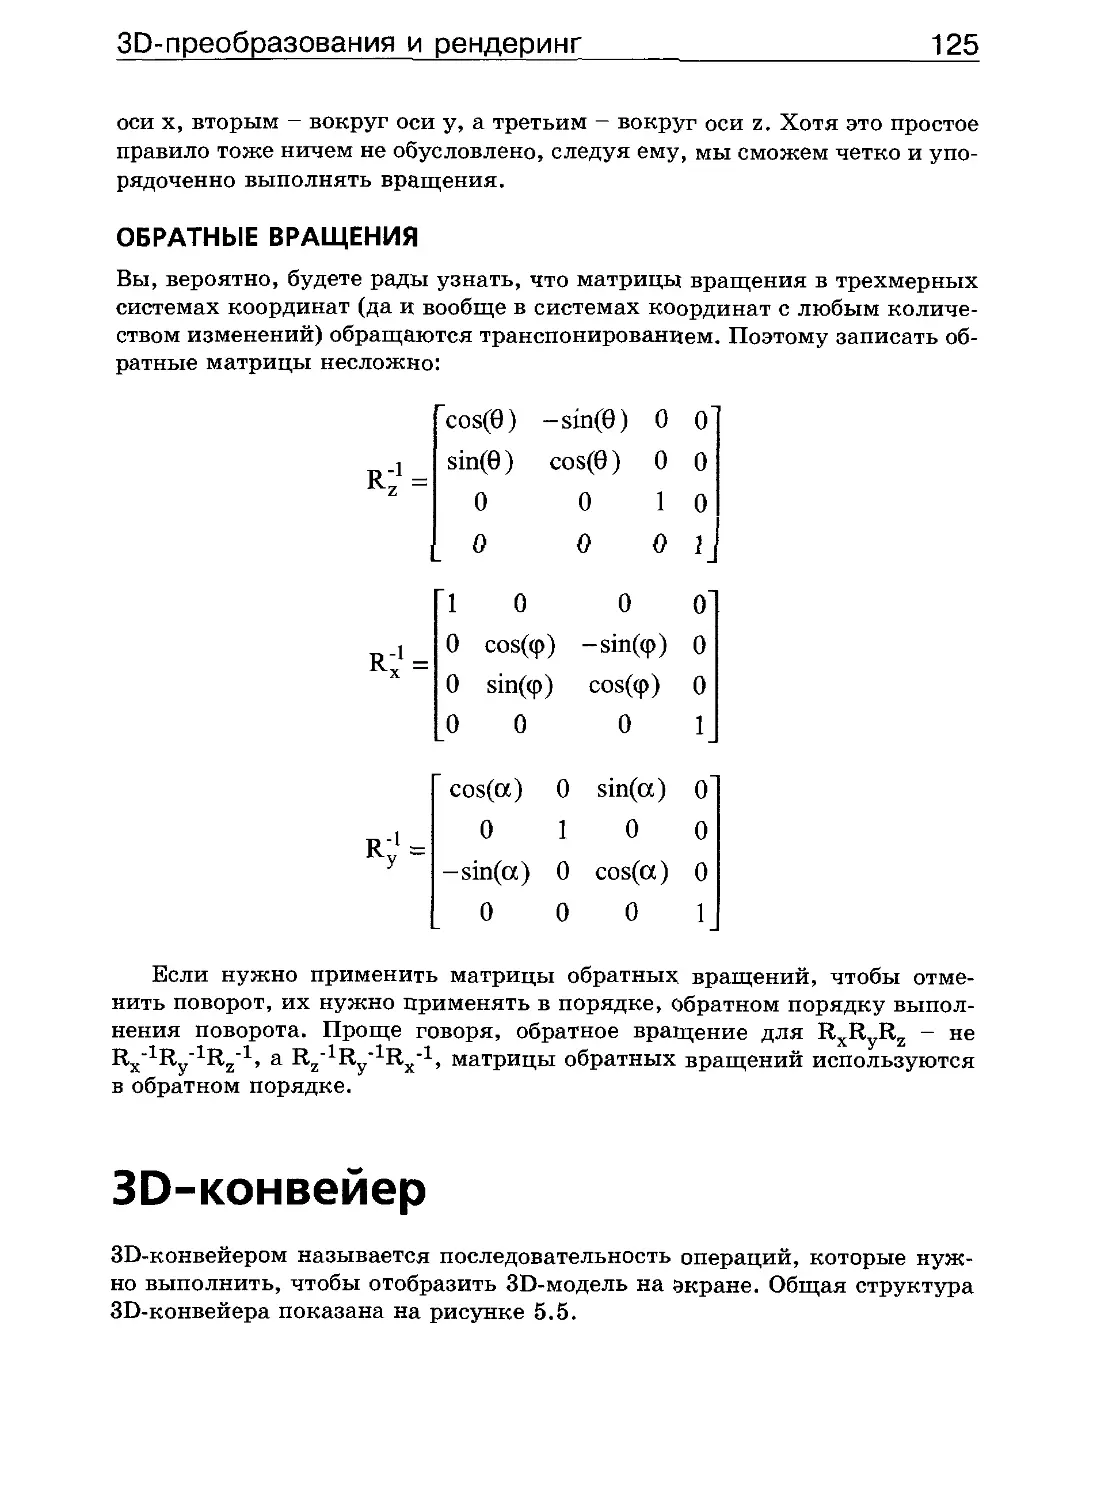 3D-конвейер